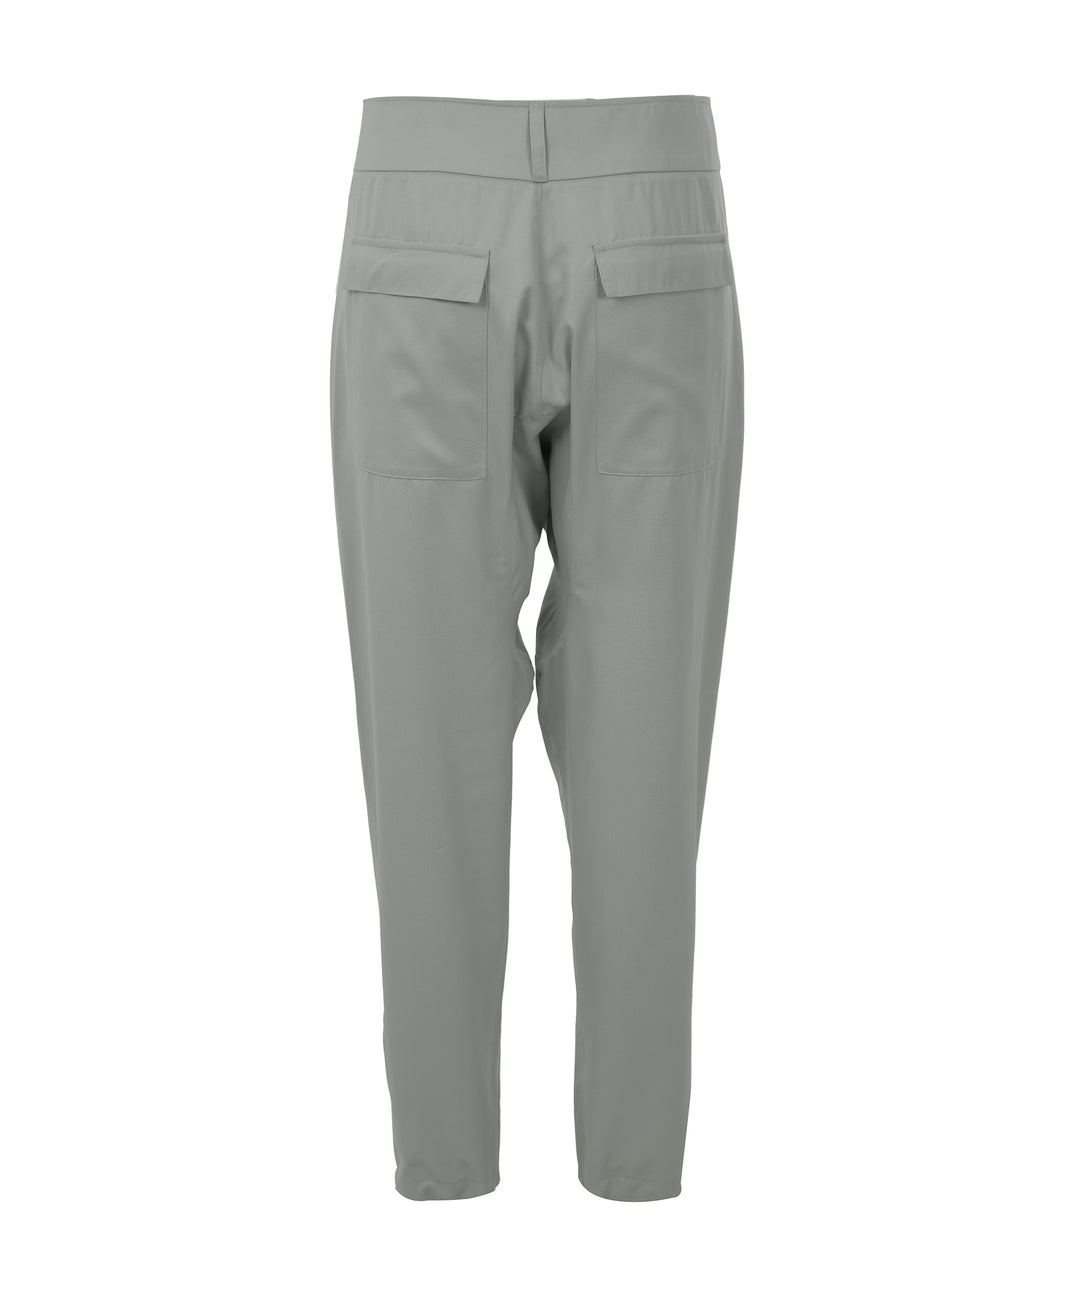 Tapered-leg trousers